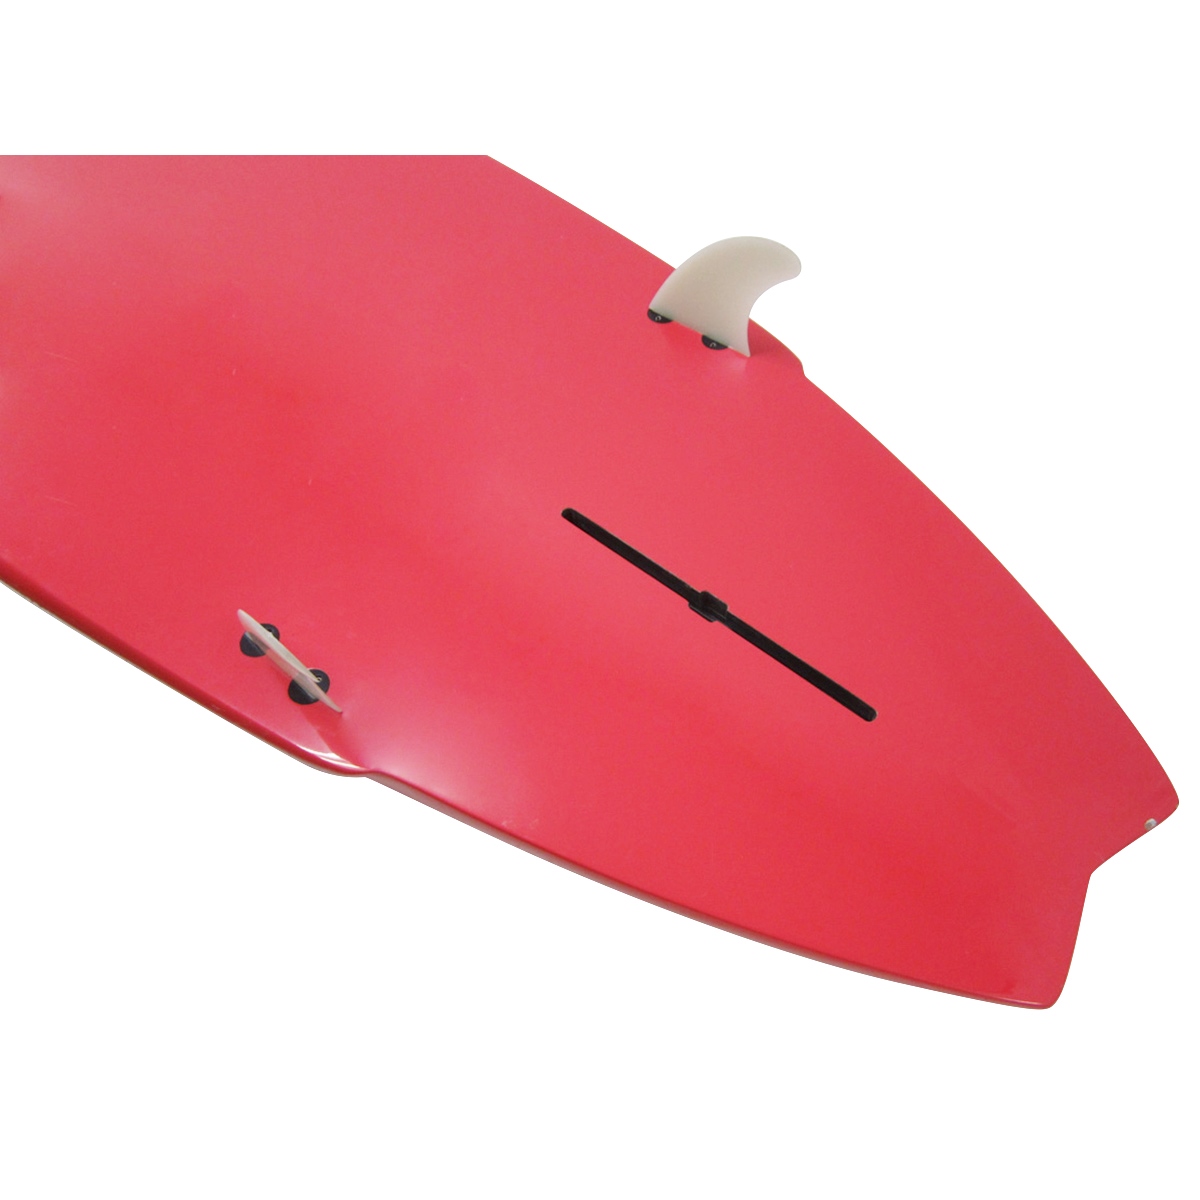 FOOTE SURFBOARDS / 10`0 SUP